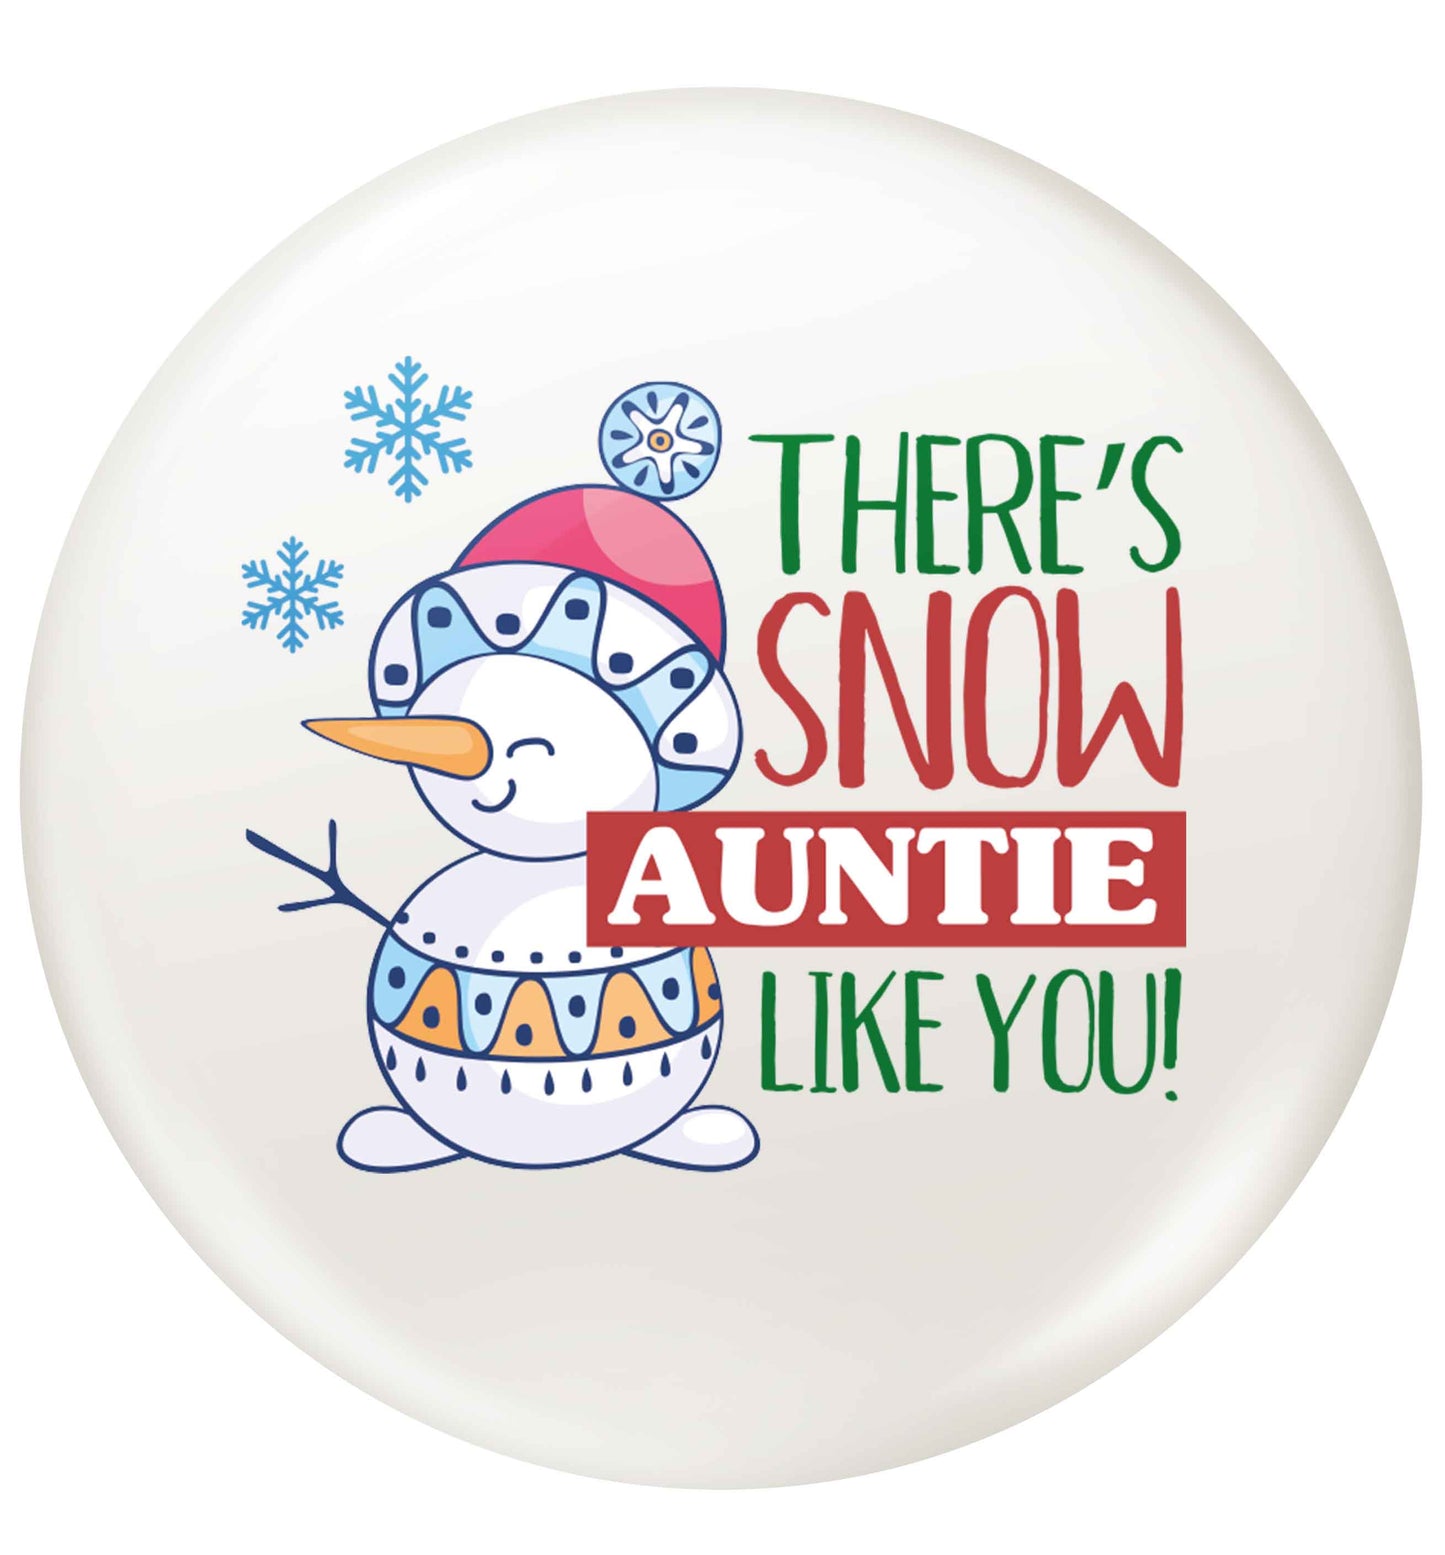 There's snow auntie like you small 25mm Pin badge